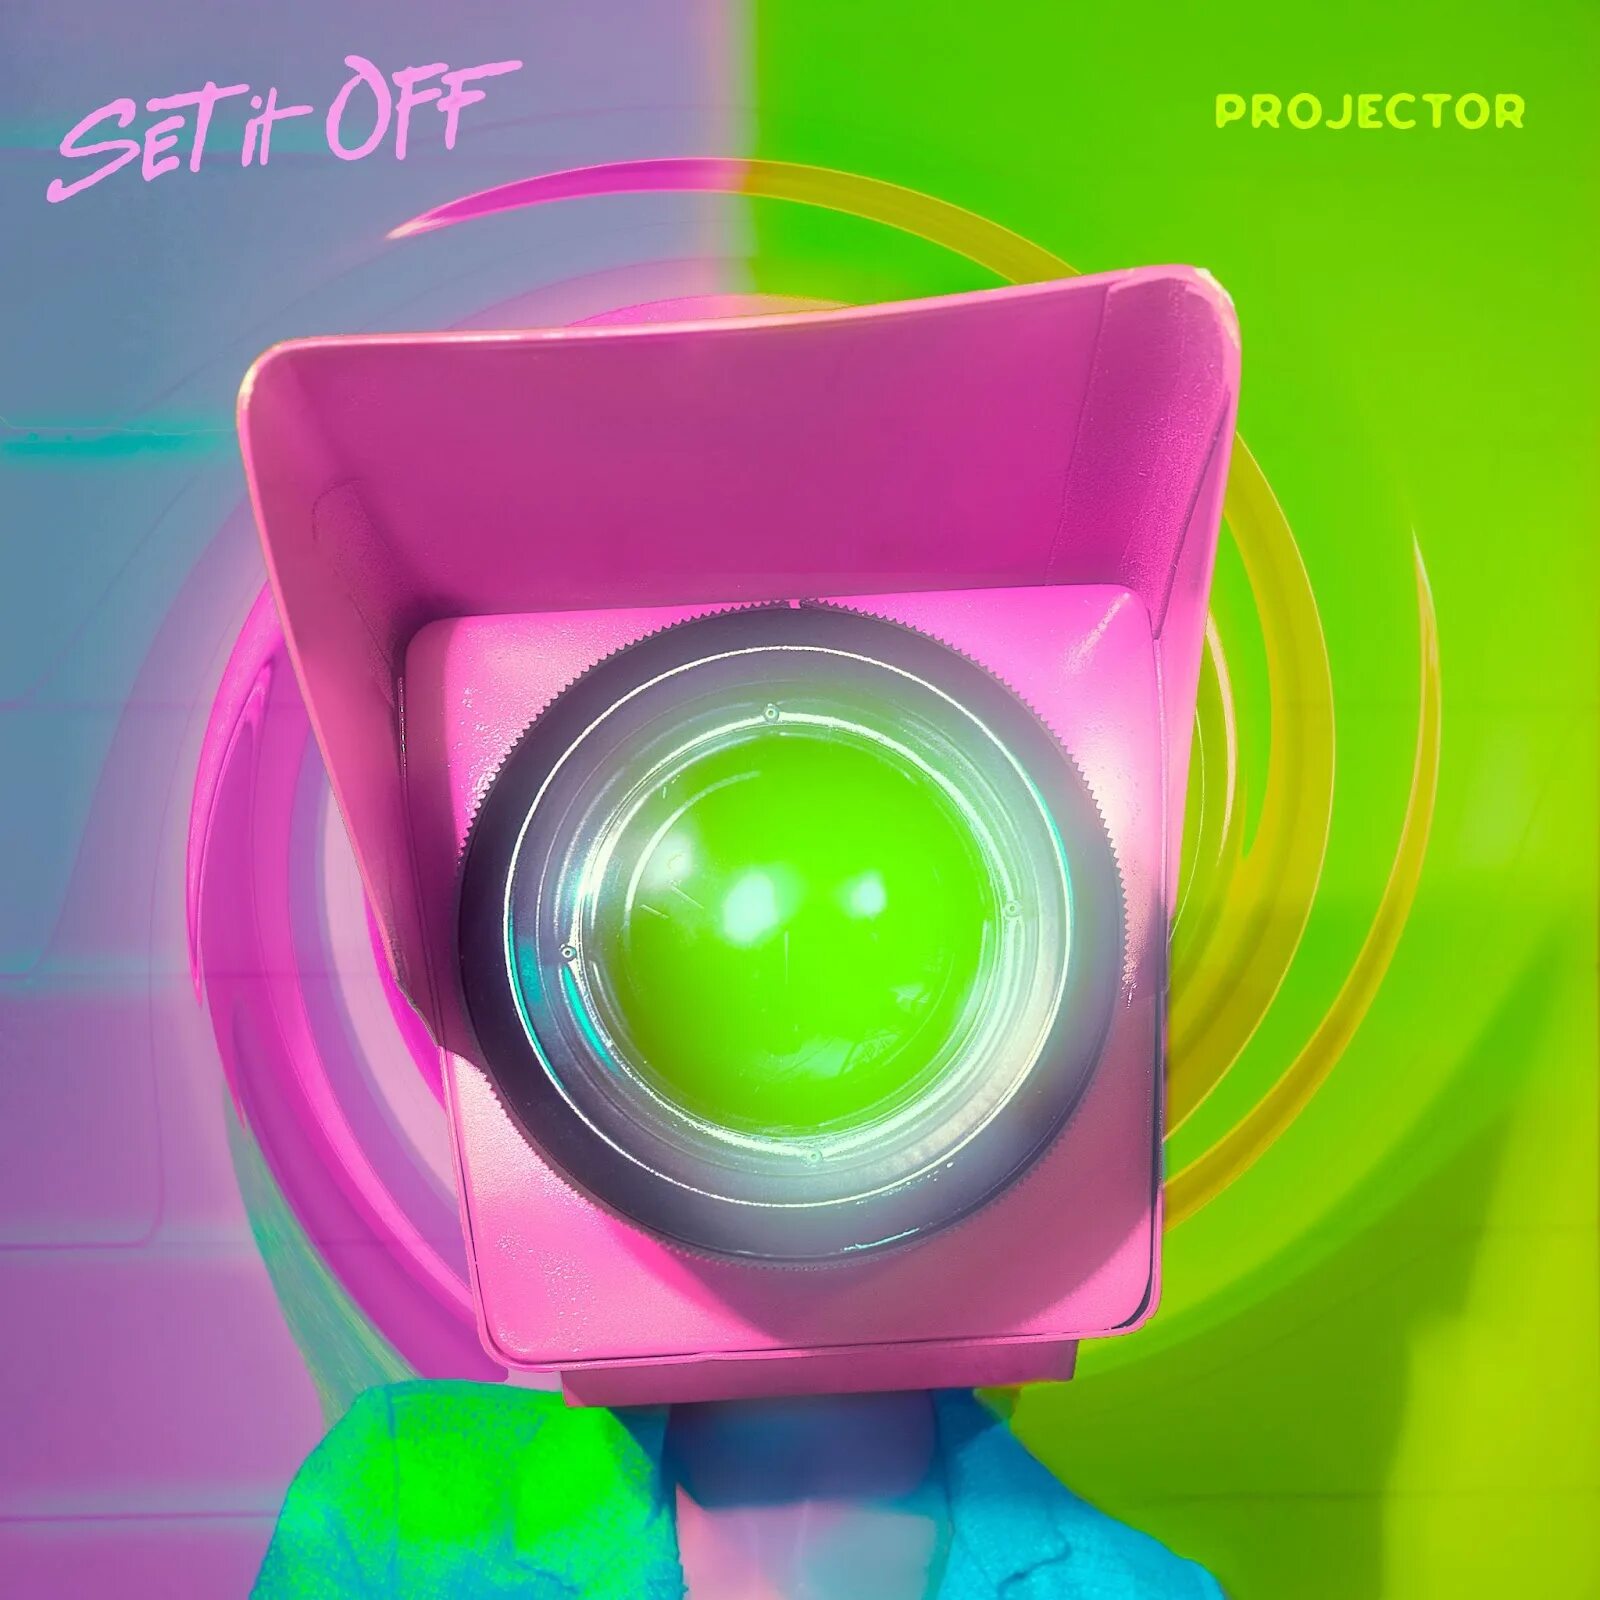 Project off. Projector Set it off. Set it off обложка. Set it off 2022. Set it off elsewhere 2022.